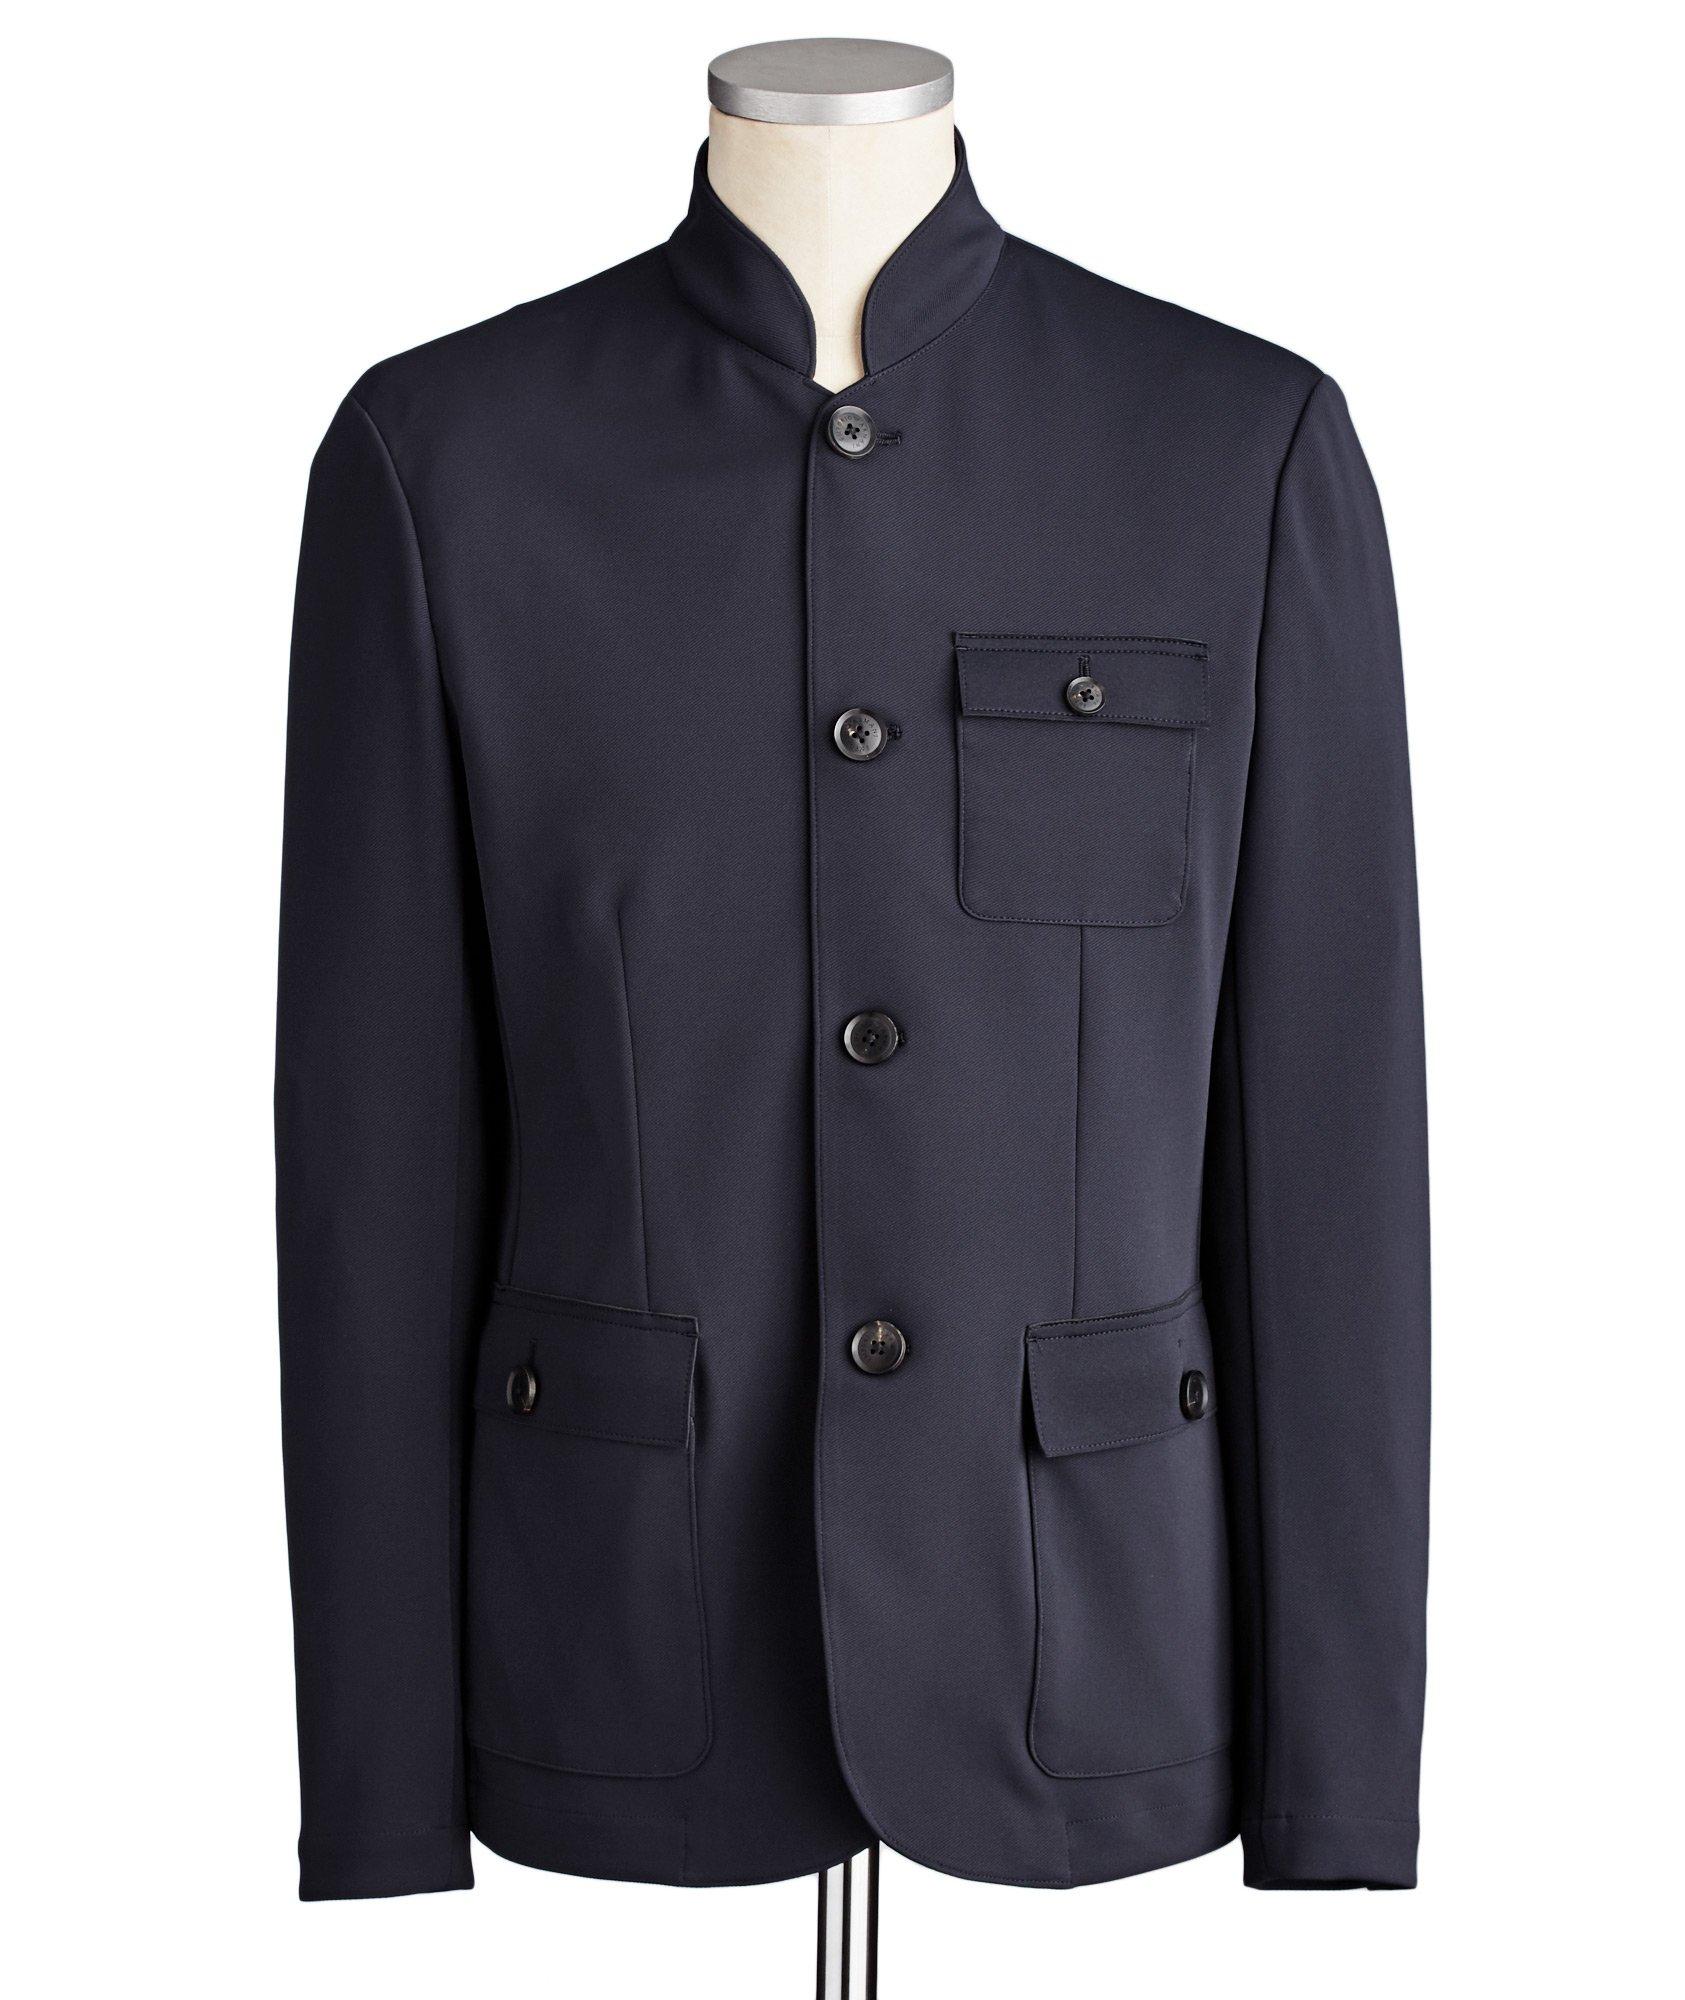 Unstructured Jersey Jacket image 0